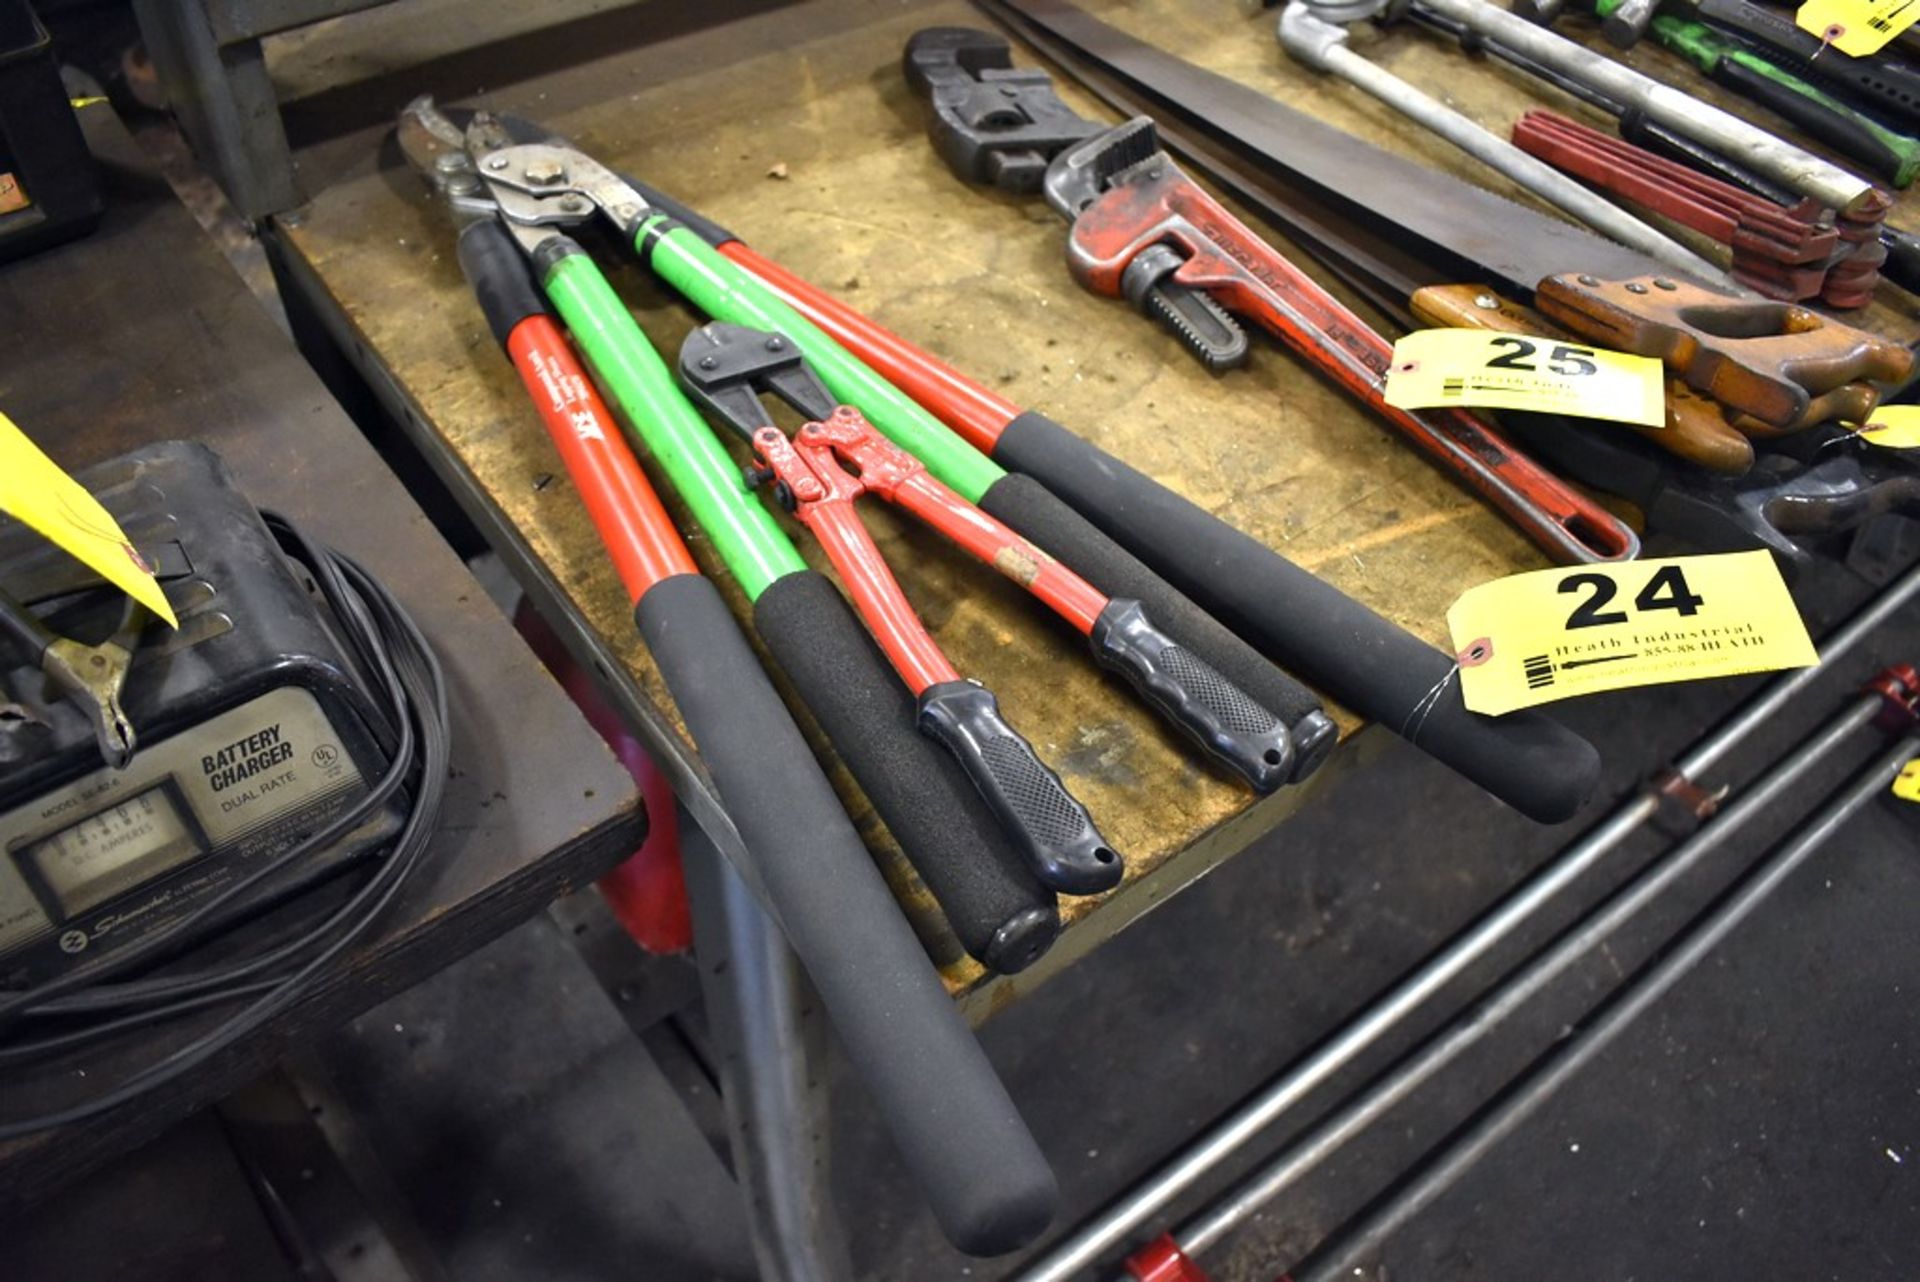 (2) COMPOUND SHEARS AND 14" BOLT CUTTERS